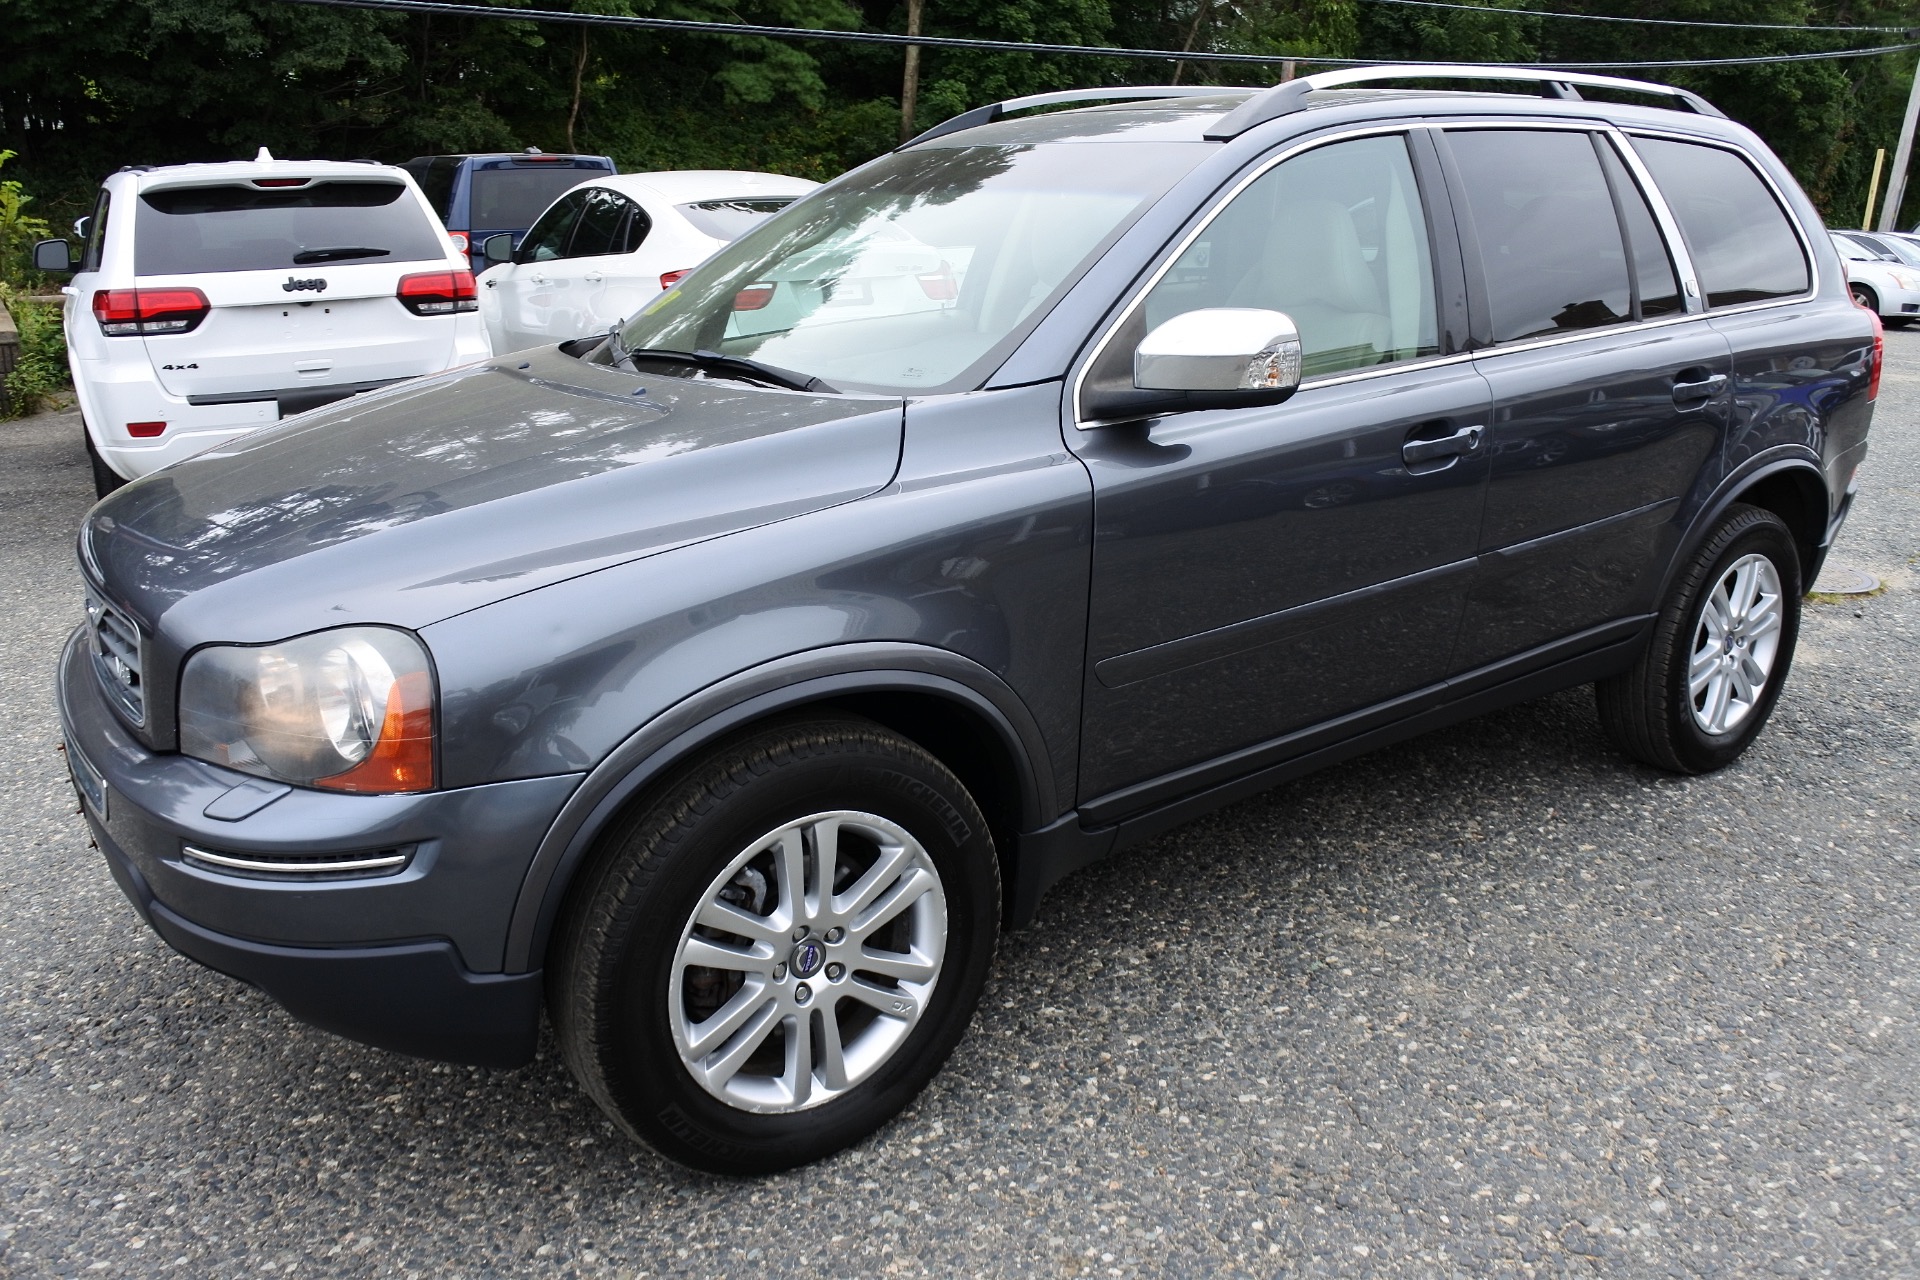 Used 2008 Volvo Xc90 V8 AWD For Sale ($7,880) | Metro West Motorcars LLC  Stock #463908